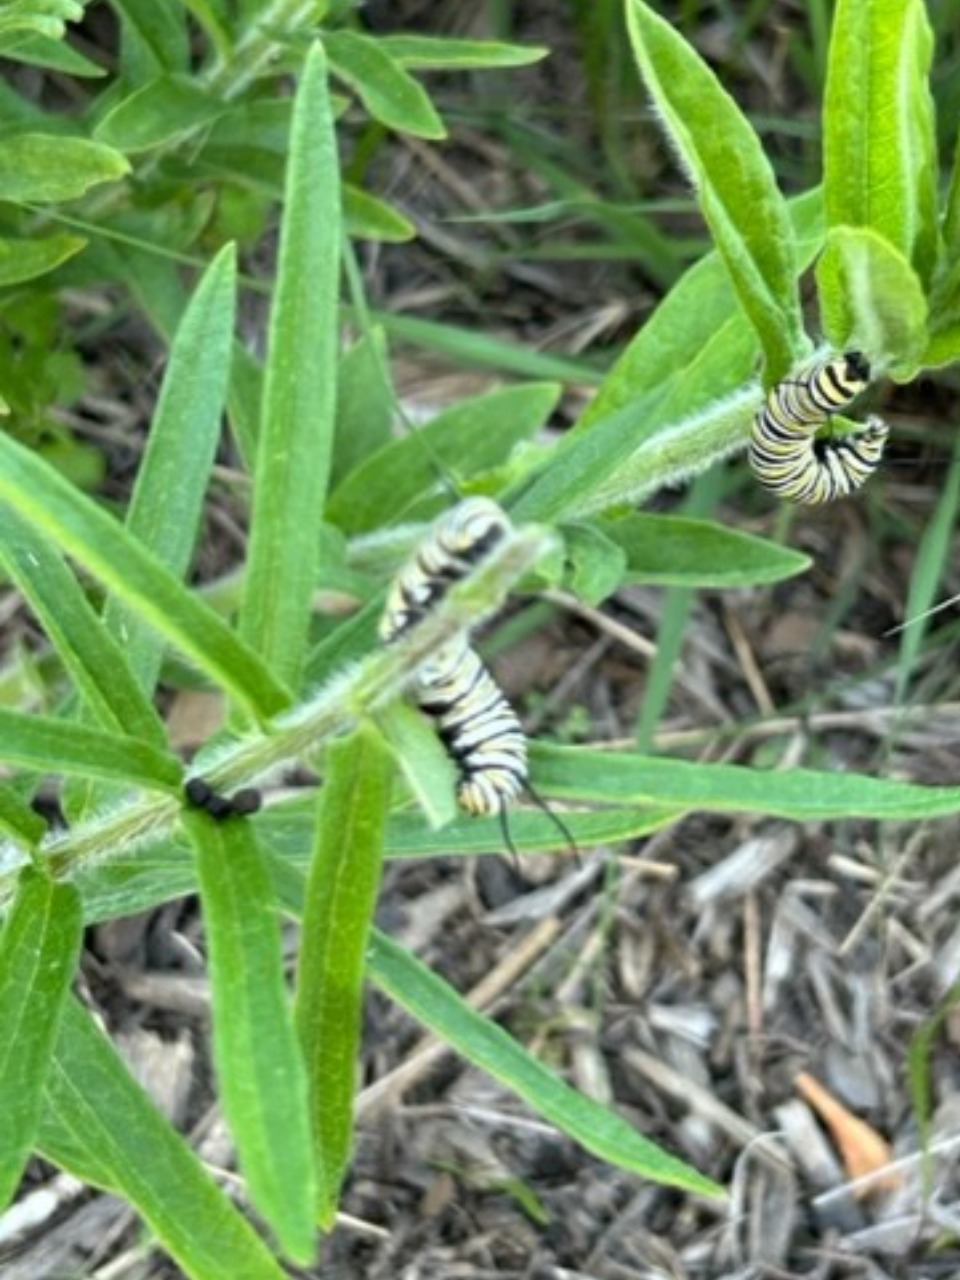 Two monarch caterpillars on a green milkweed plant